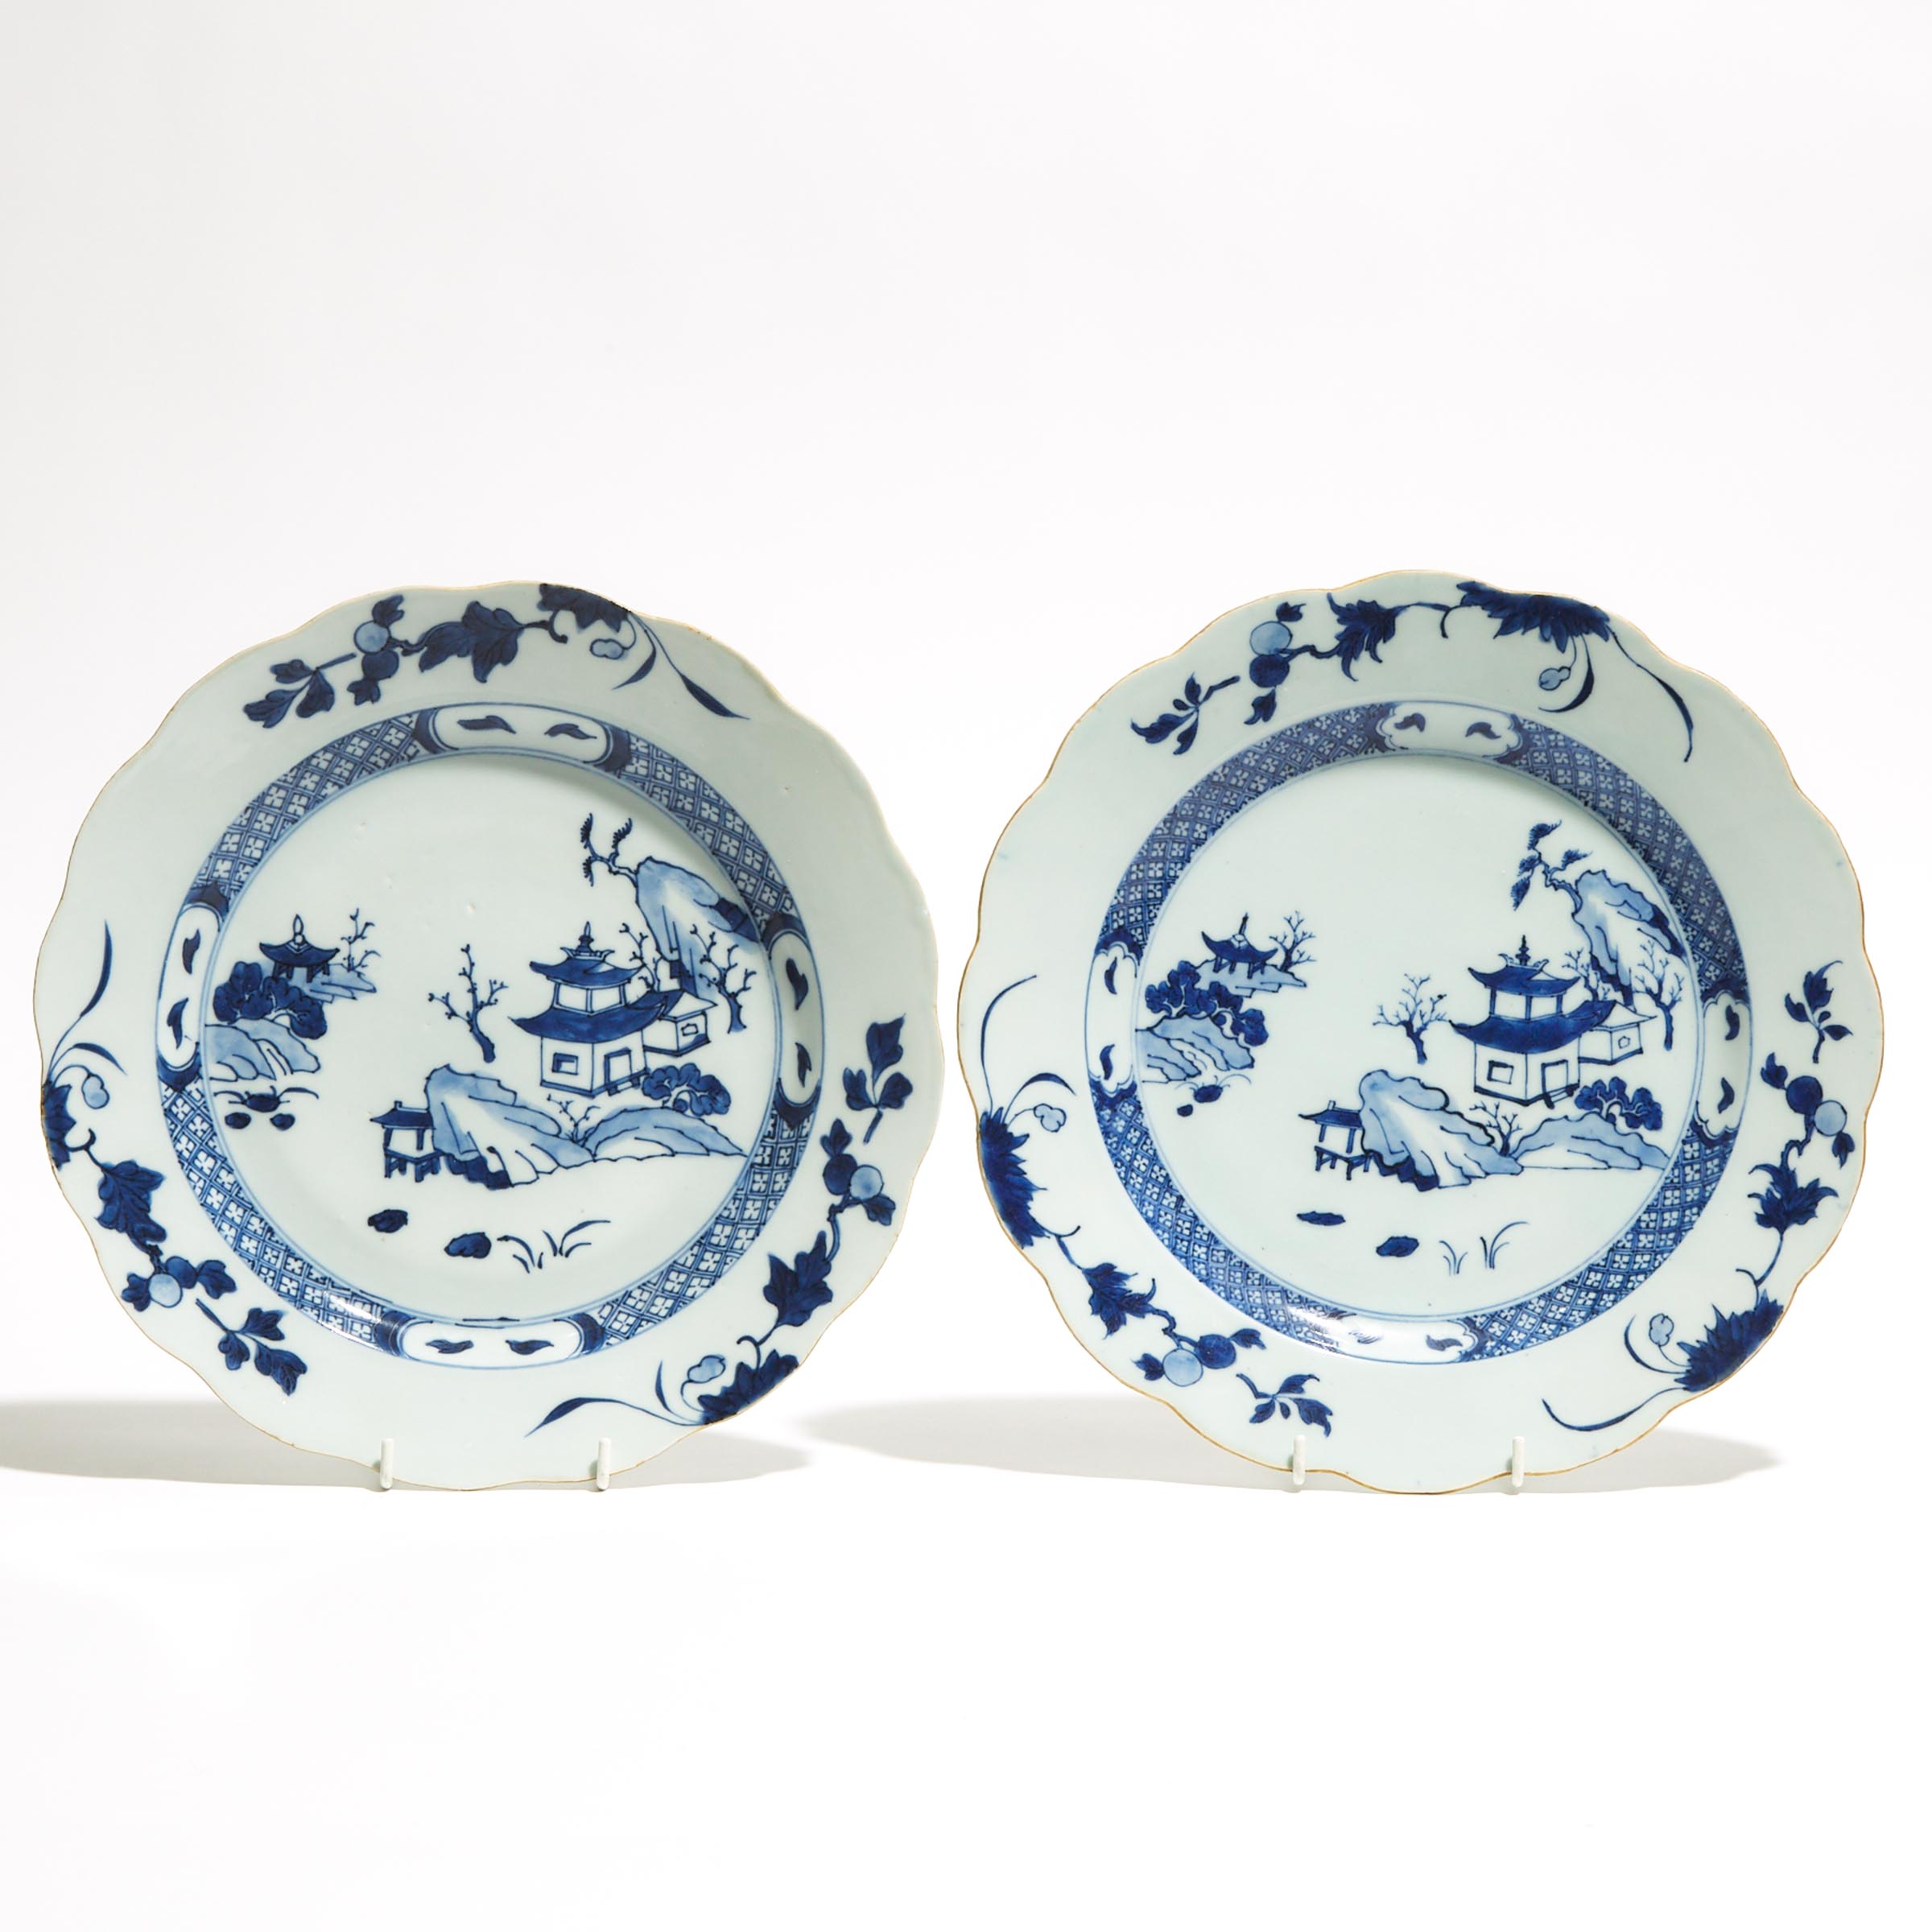 A Pair of 'Three Pavilions' Pattern Lobed Dishes from the Nanking Cargo, Qianlong Period, Circa 1750